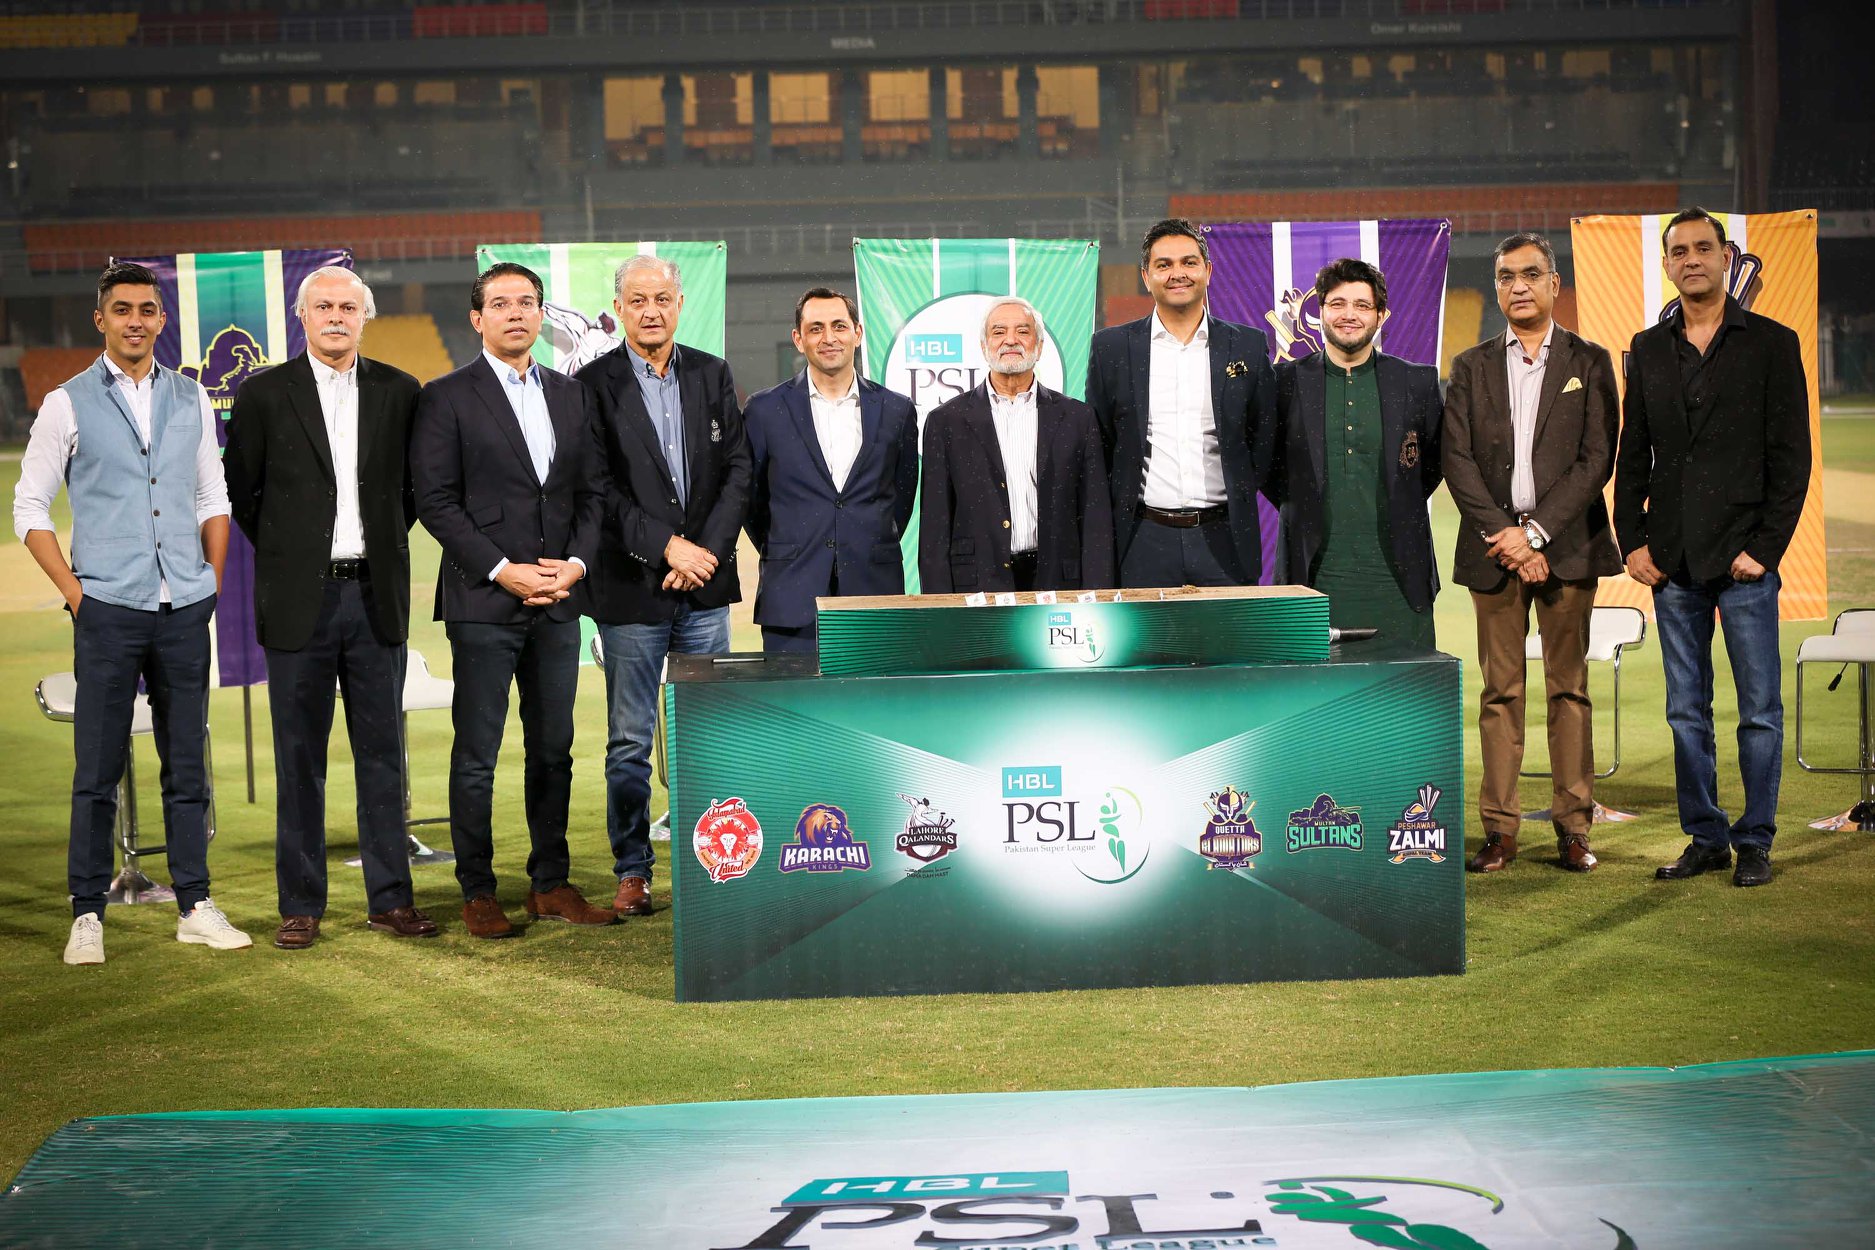 Combat between PCB and PSL franchises over finance